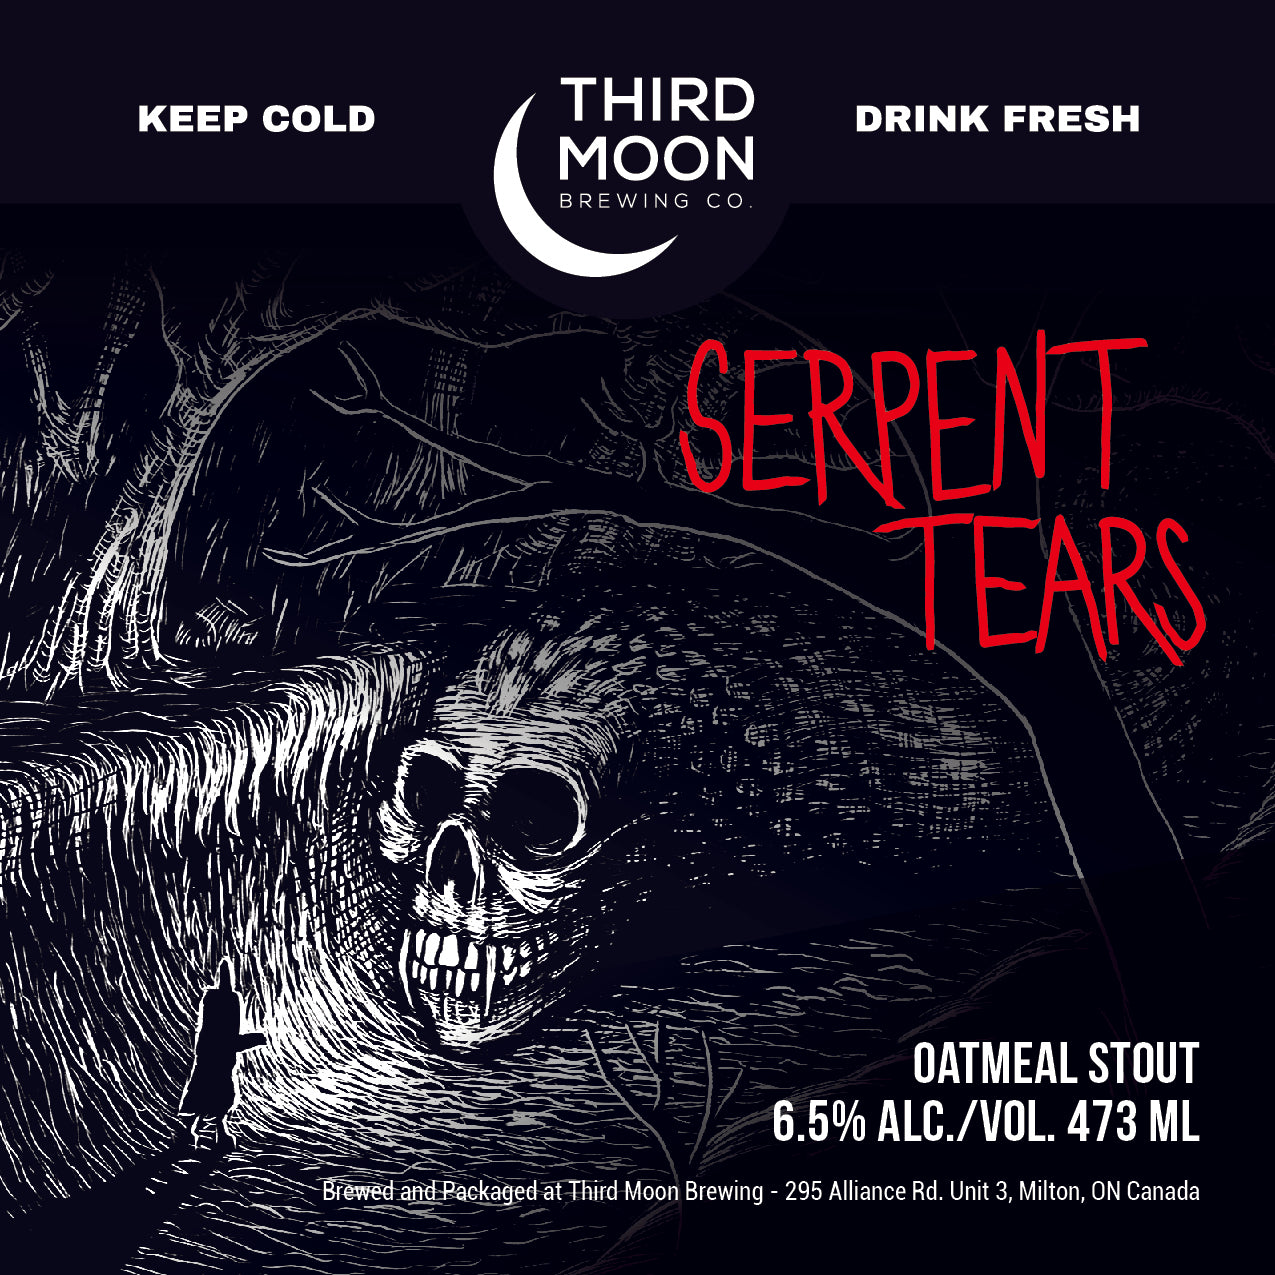 Oatmeal Stout - "Serpent Tears" tall can